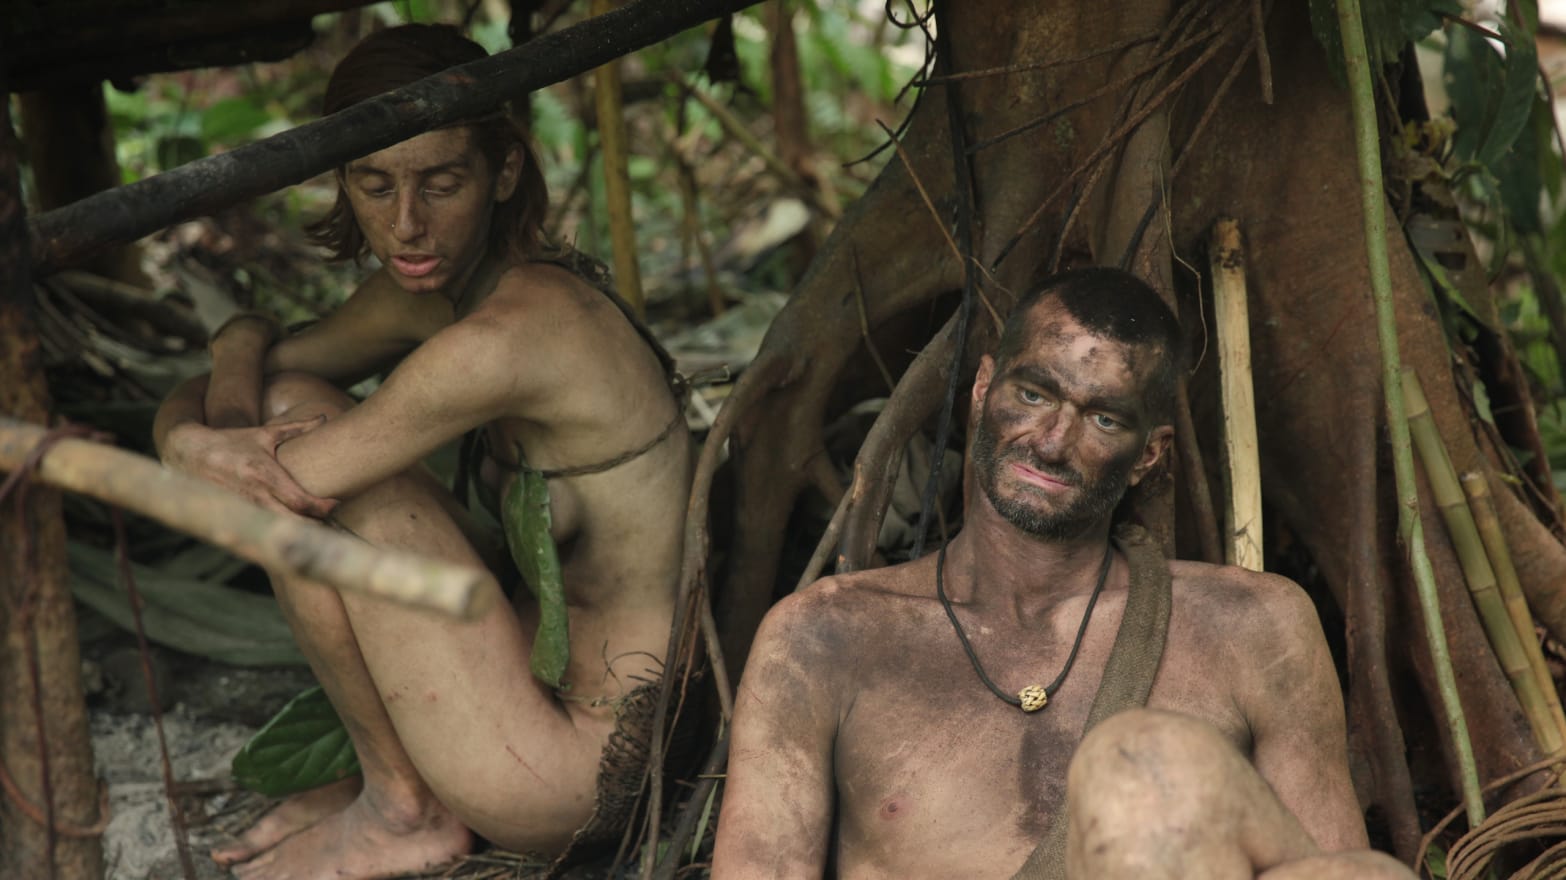 Naked and Afraid' Is the Craziest Show on TV—You Just Have to Watch.